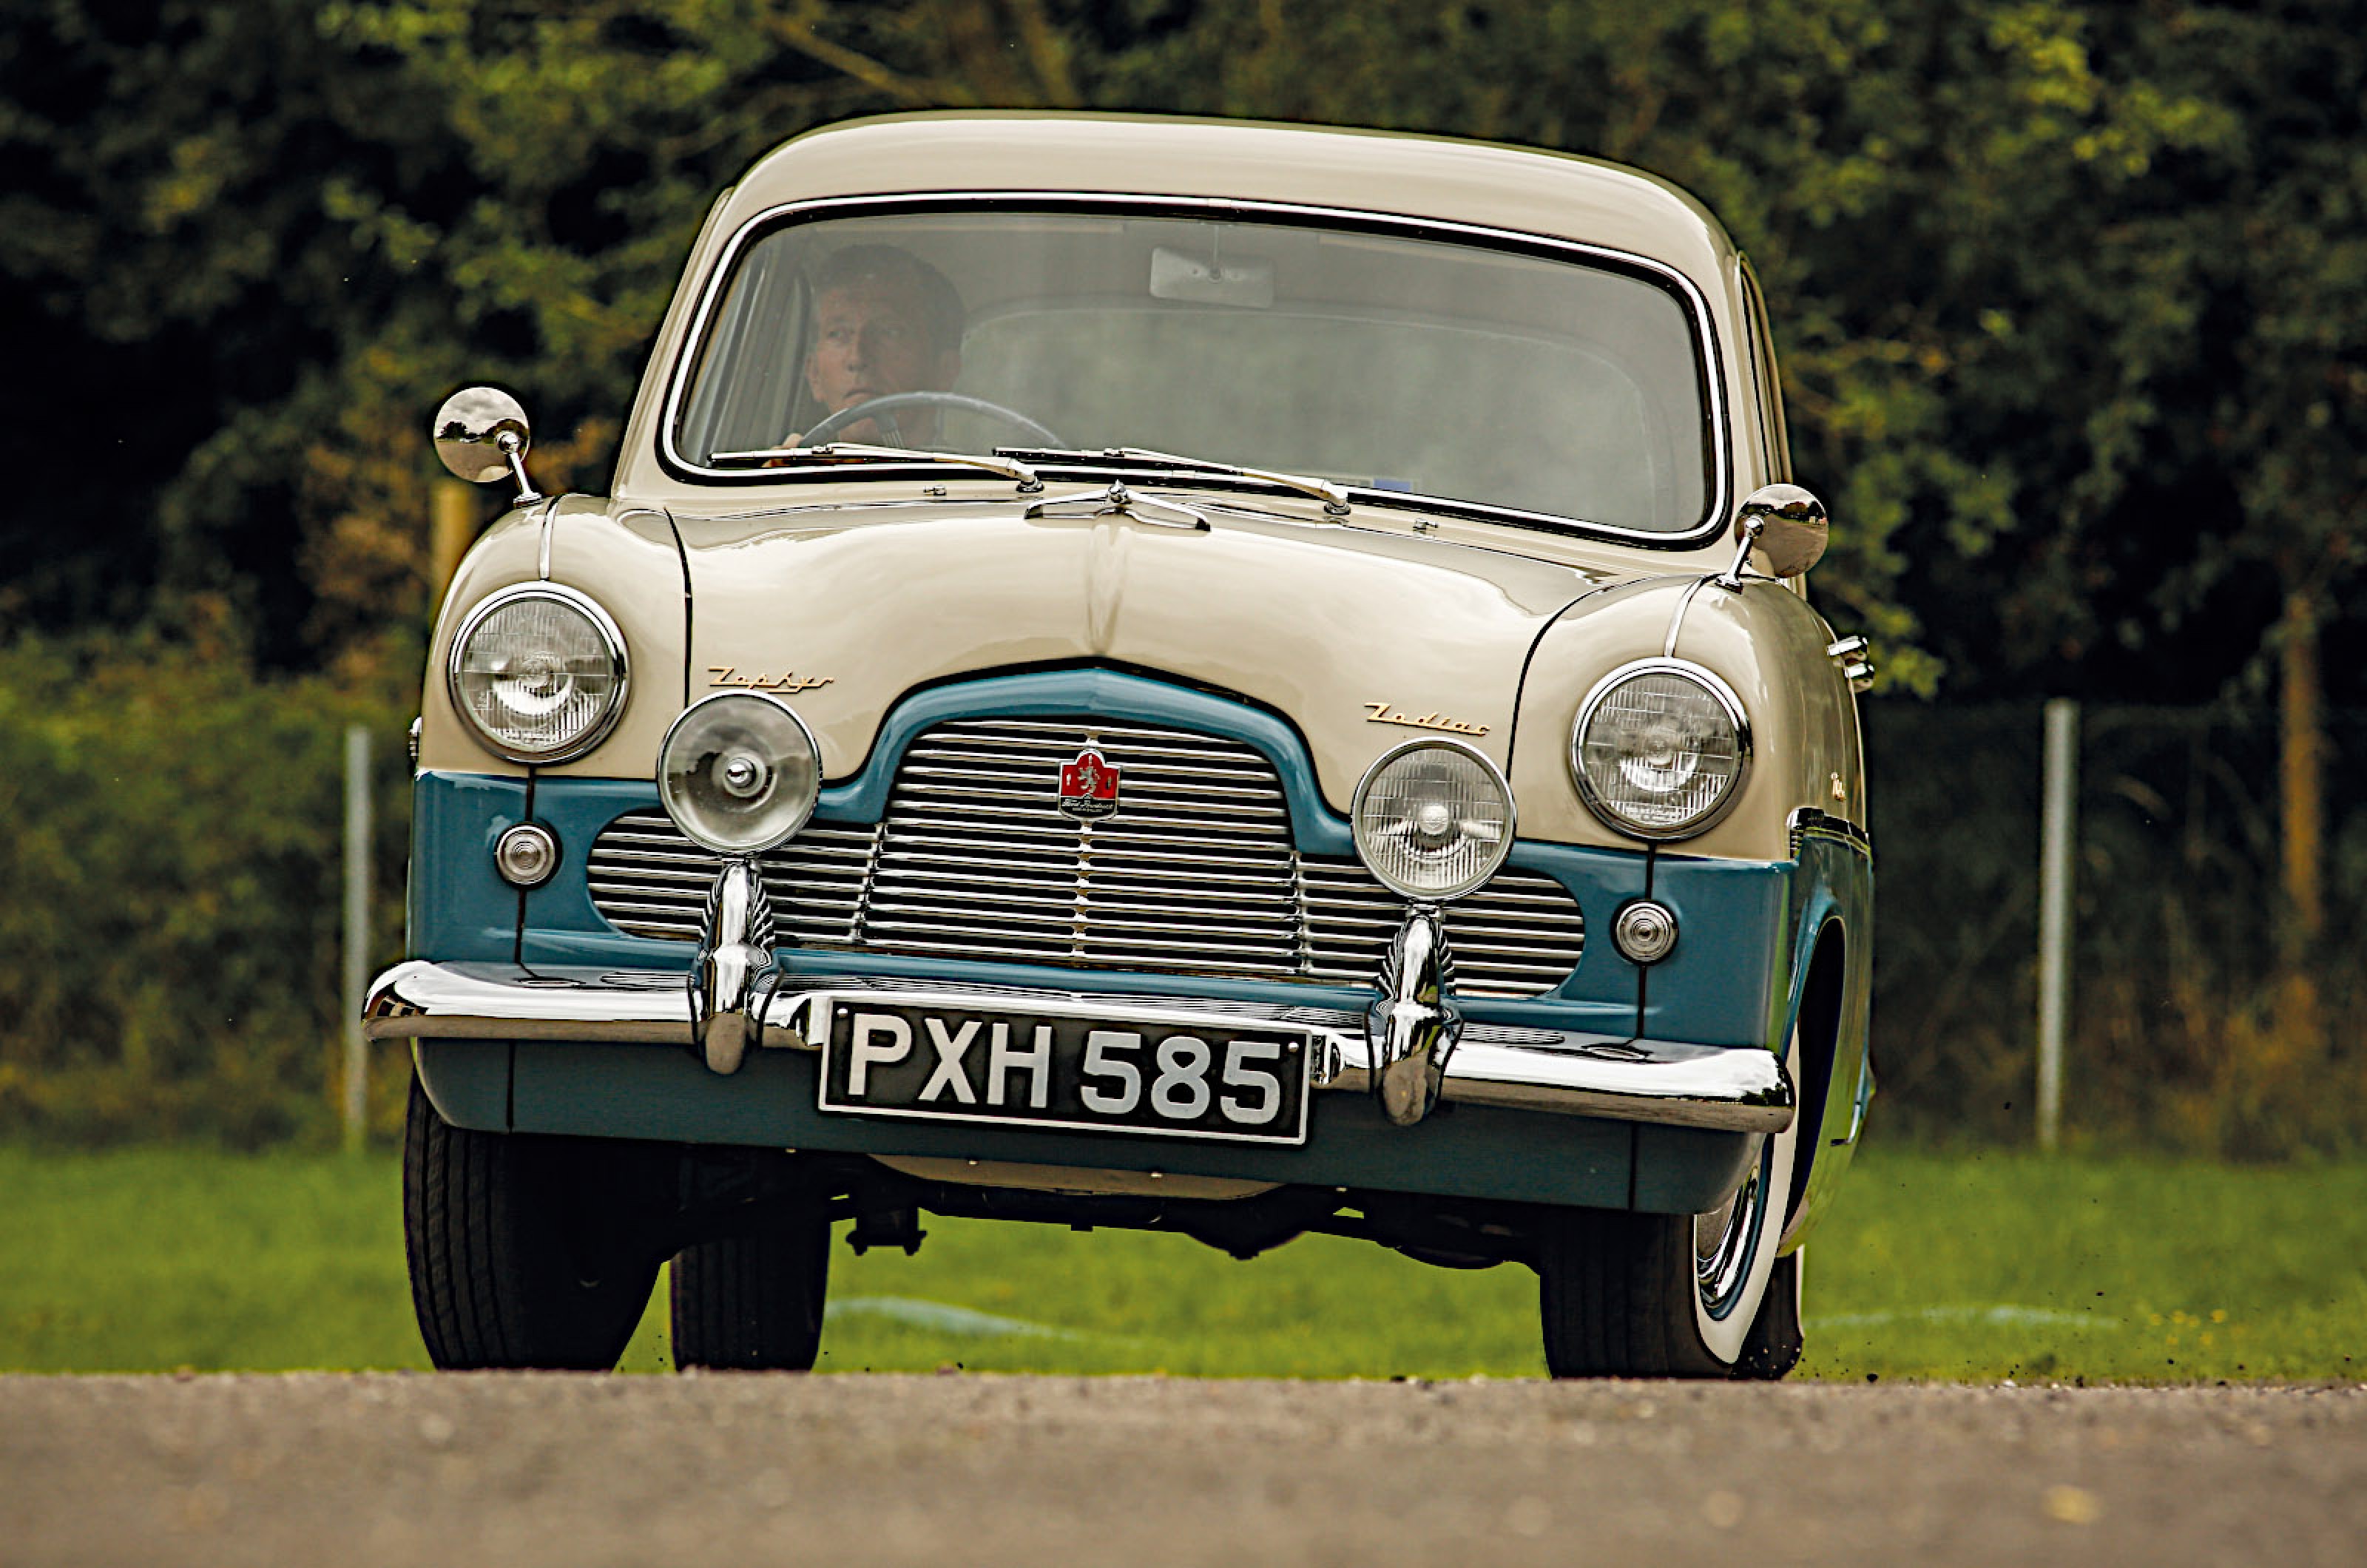 <p>According to motoring author Eric Dymock, Ford’s UK operation was transformed ‘almost overnight’ in 1950 into ‘a design-conscious, avant-garde fashion house’.</p>  <p>The Consul and Zephyr (the latter with a longer nose to accommodate its straight-six engine) looked completely different from recent British Fords, all of which had an air of the late 1930s about them.</p>  <p>These ponton-style cars looked remarkably similar to the 1949 Ford full-size model range in the US, though their hood lines were much flatter, they had far less chrome and even the Zephyr was considerably shorter.</p>  <p>Both models, and the upmarket Zodiac (pictured) which came along later, were replaced in 1956 by similarly American-looking versions featuring the hooded headlights which Ford had already adopted for some of its US models.</p>